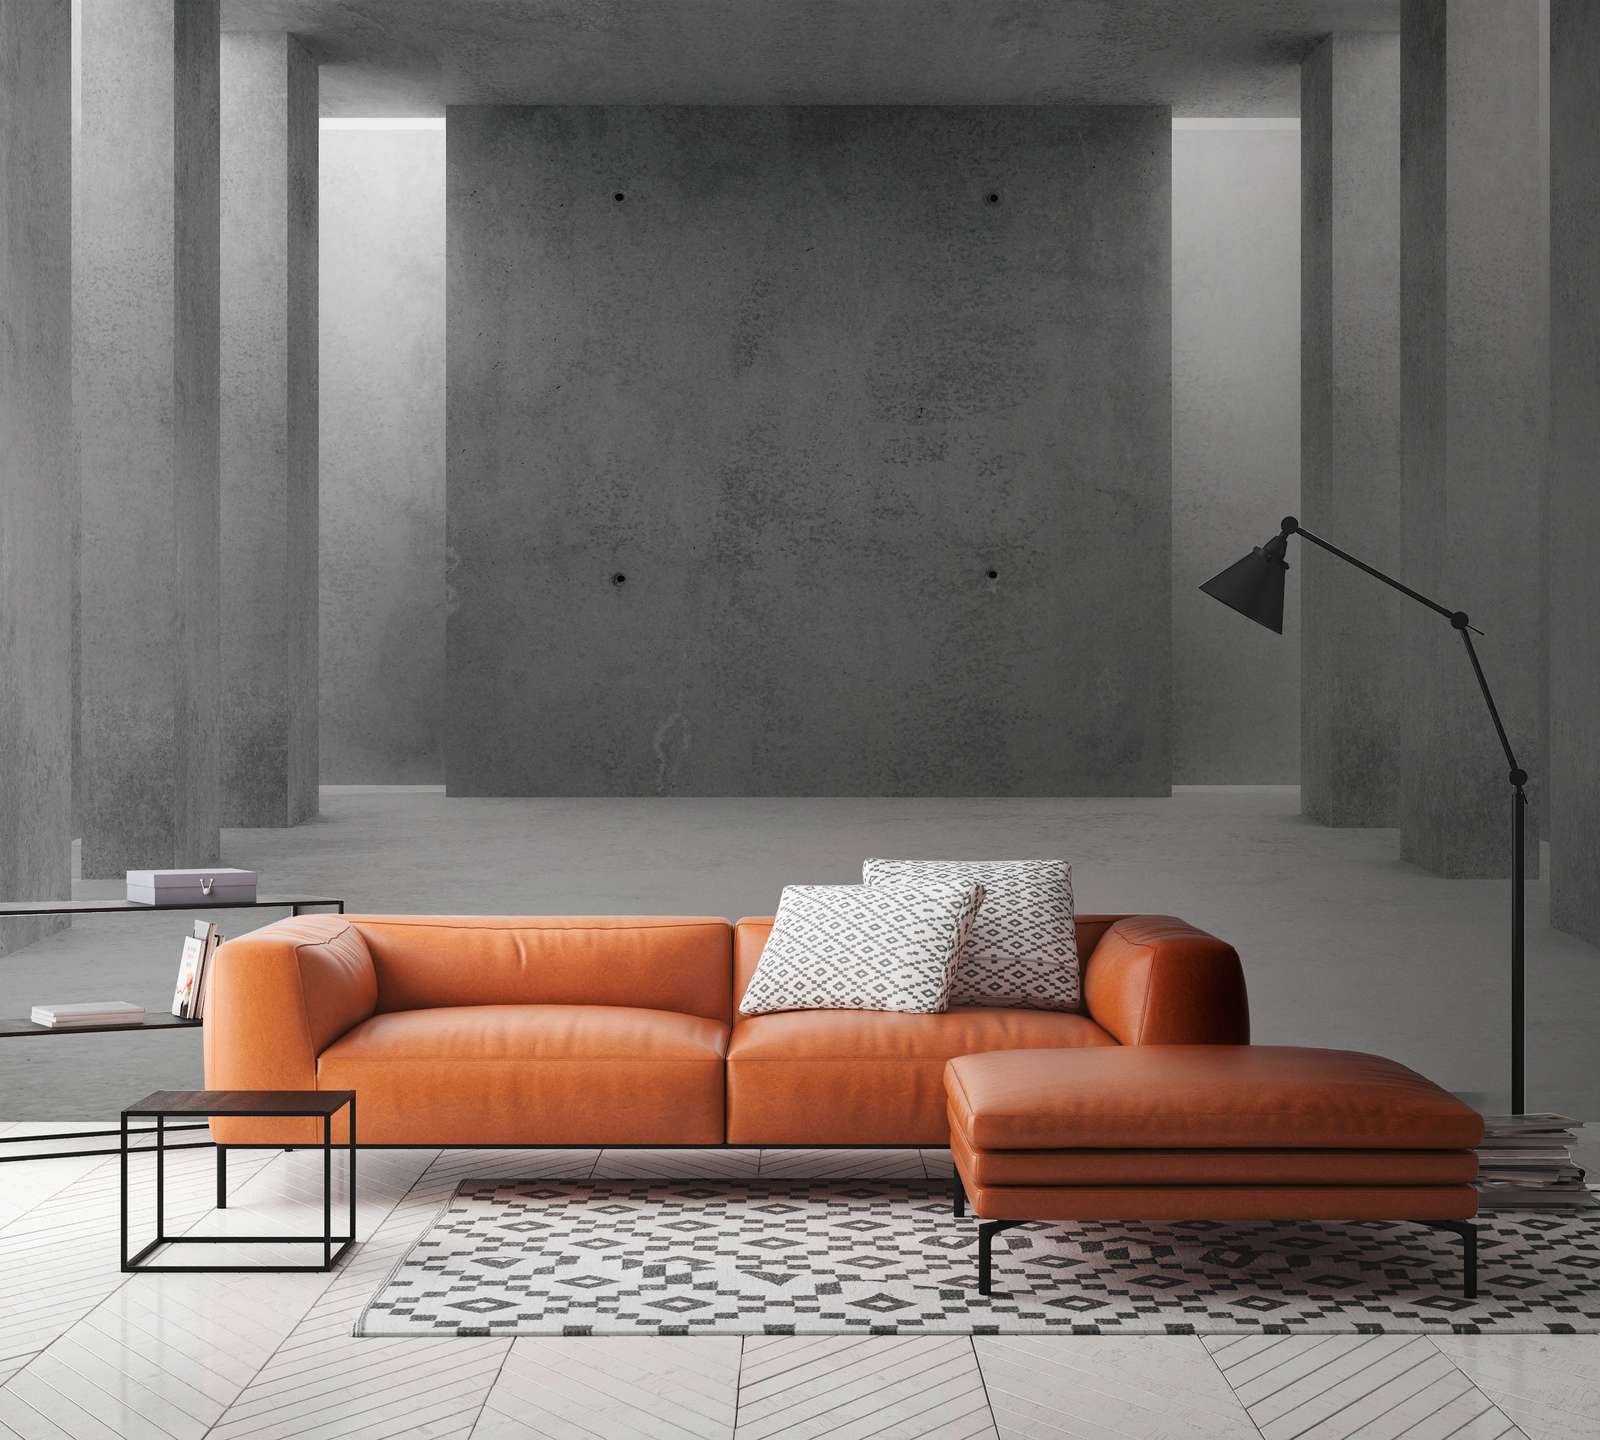             Photo wallpaper with a 3D concrete room - Grey
        